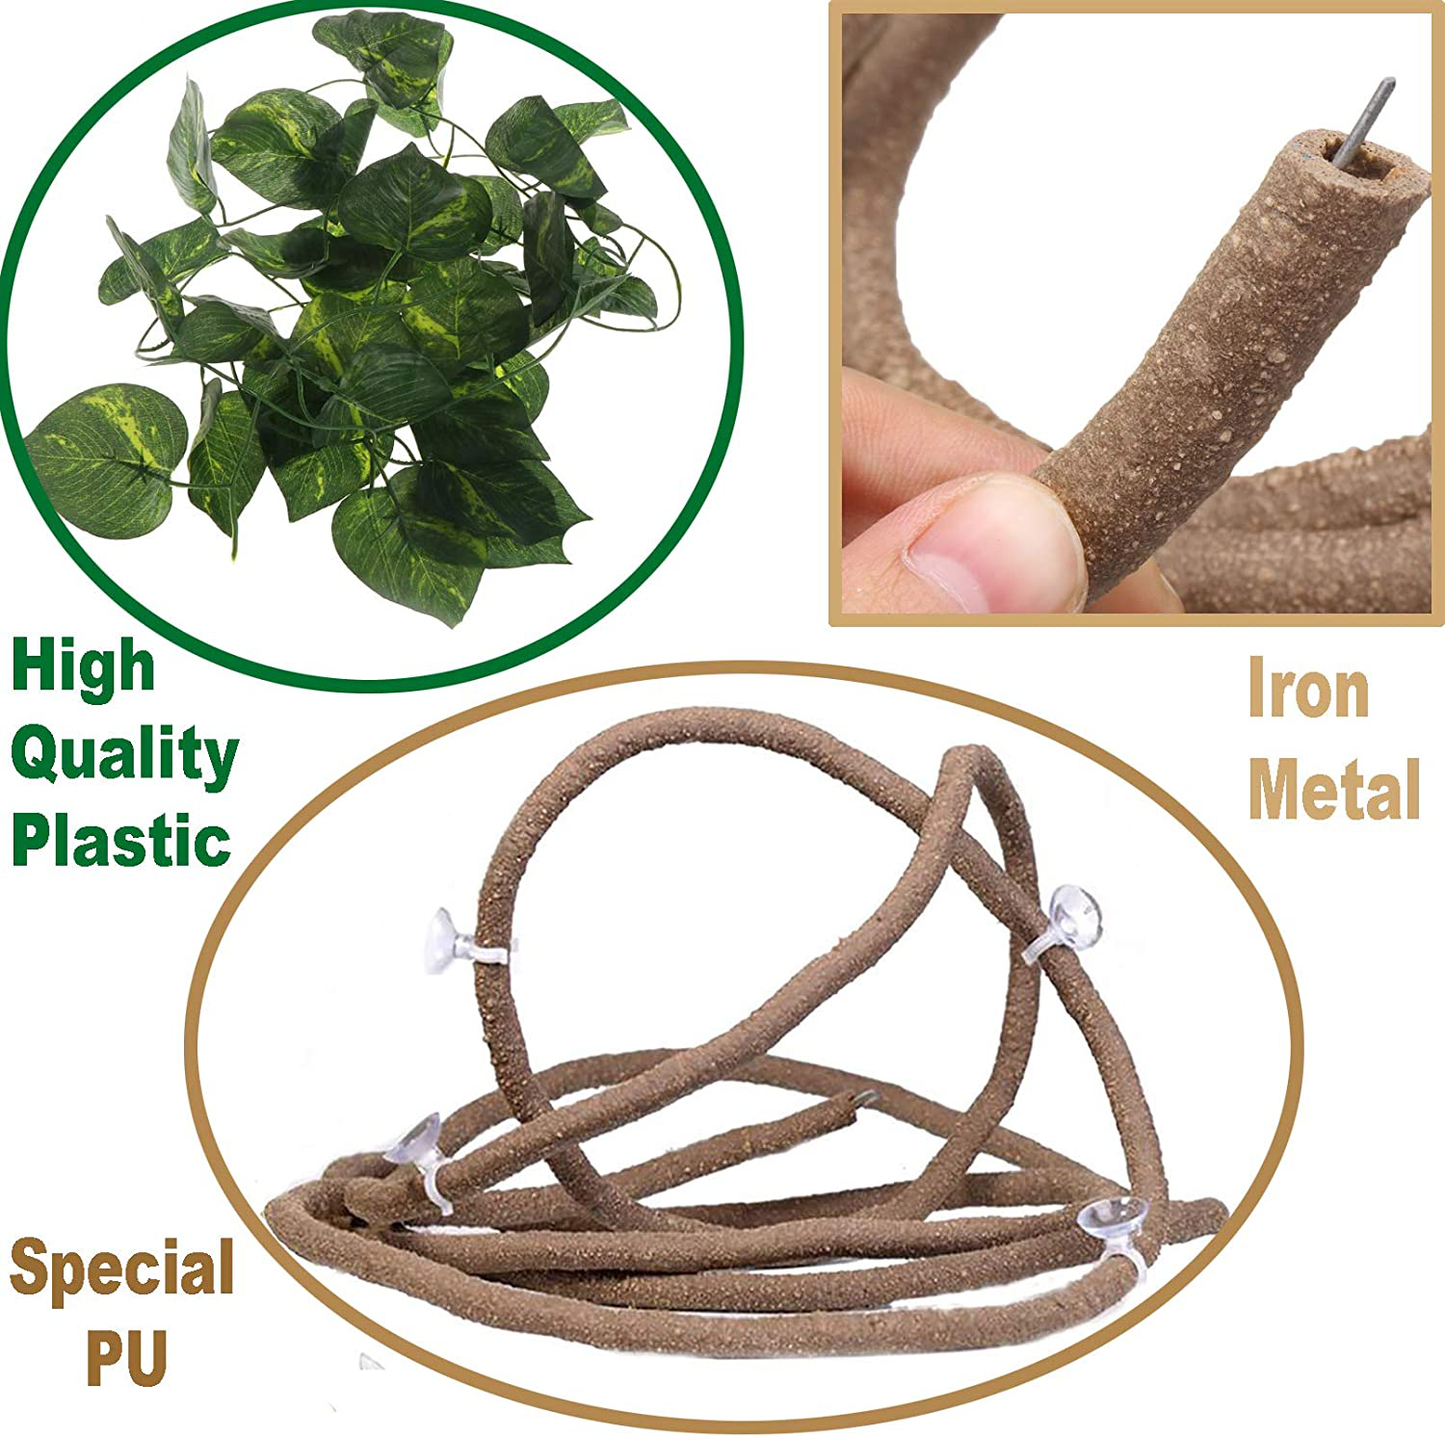 Tfwadmx Reptiles Jungle Vines Bend a Branch Ivy 4Pcs Artificial Fake Leaves Habitat Ornaments for Chameleons, Snakes, Lizards, Frogs